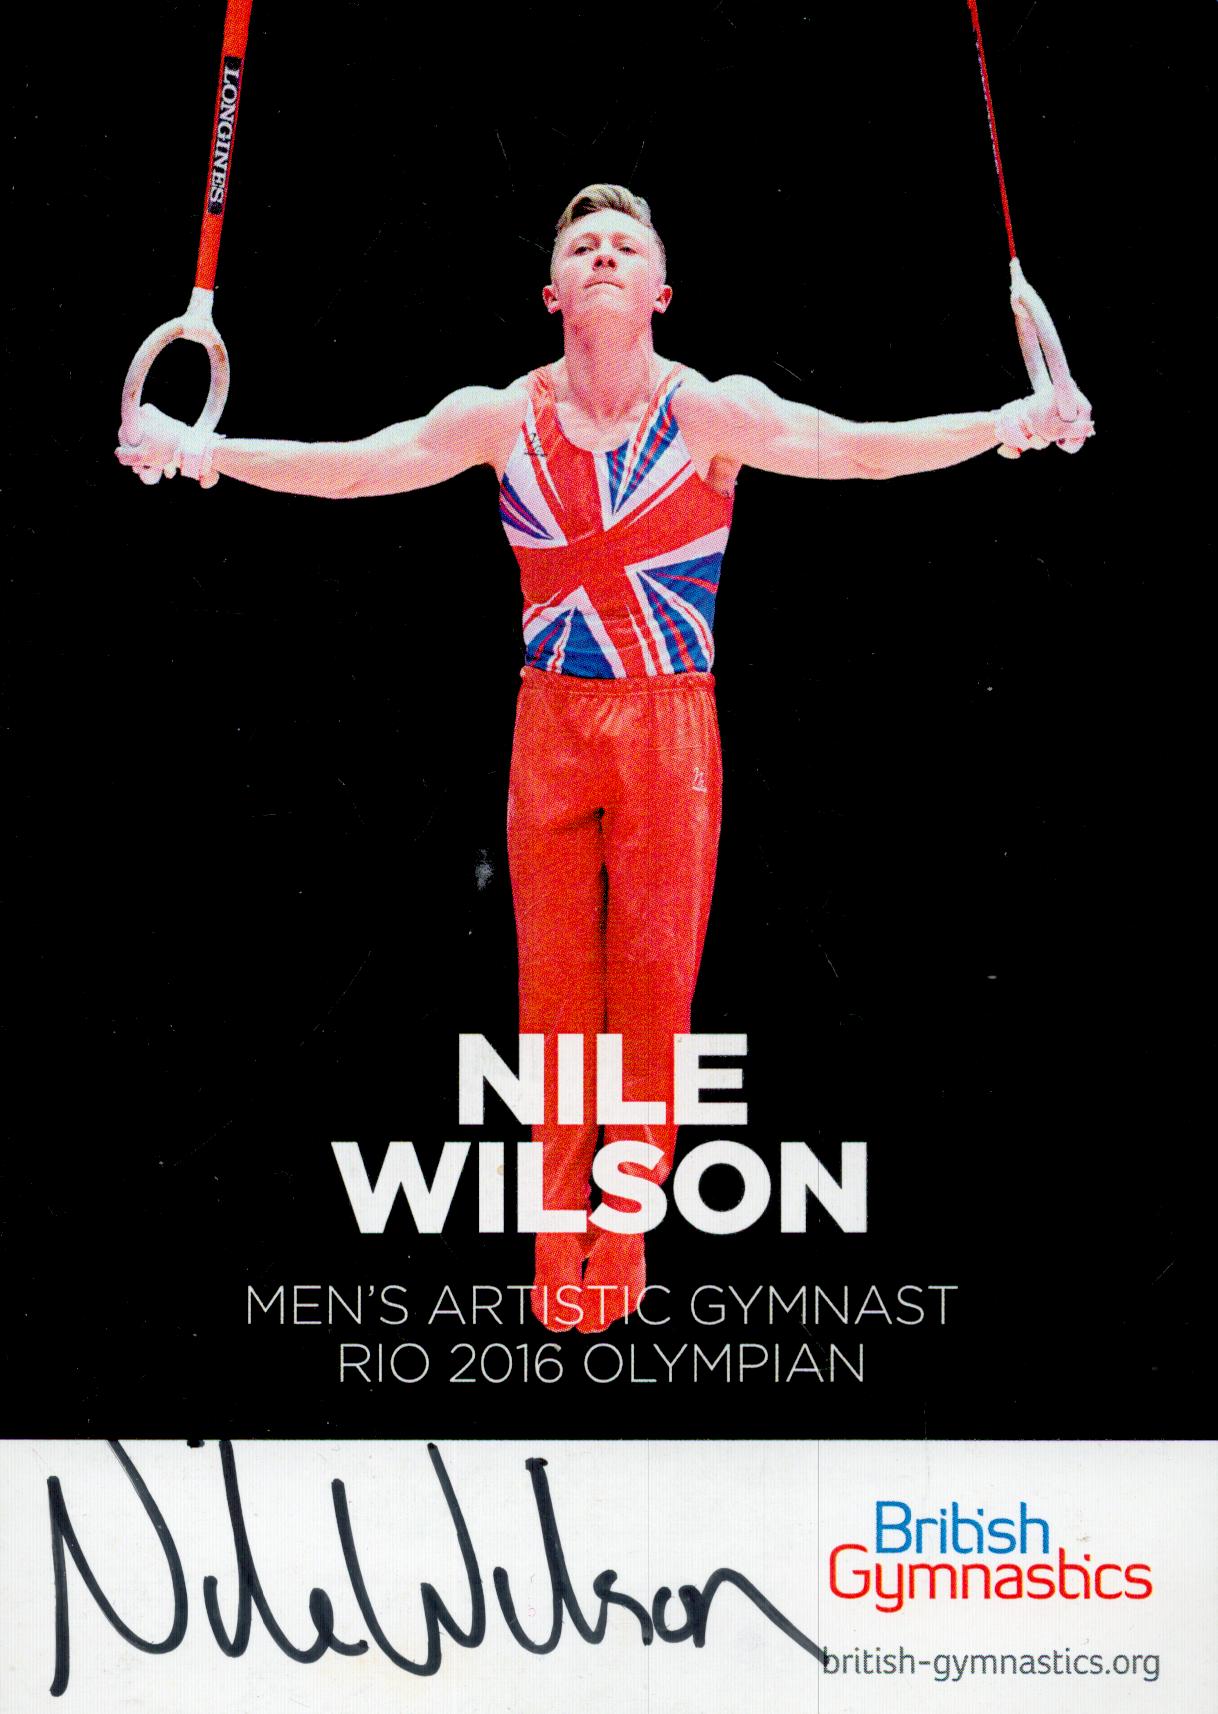 Nile Wilson signed promo colour photo 6x4 Inch. Is a former British artistic gymnast. He won an